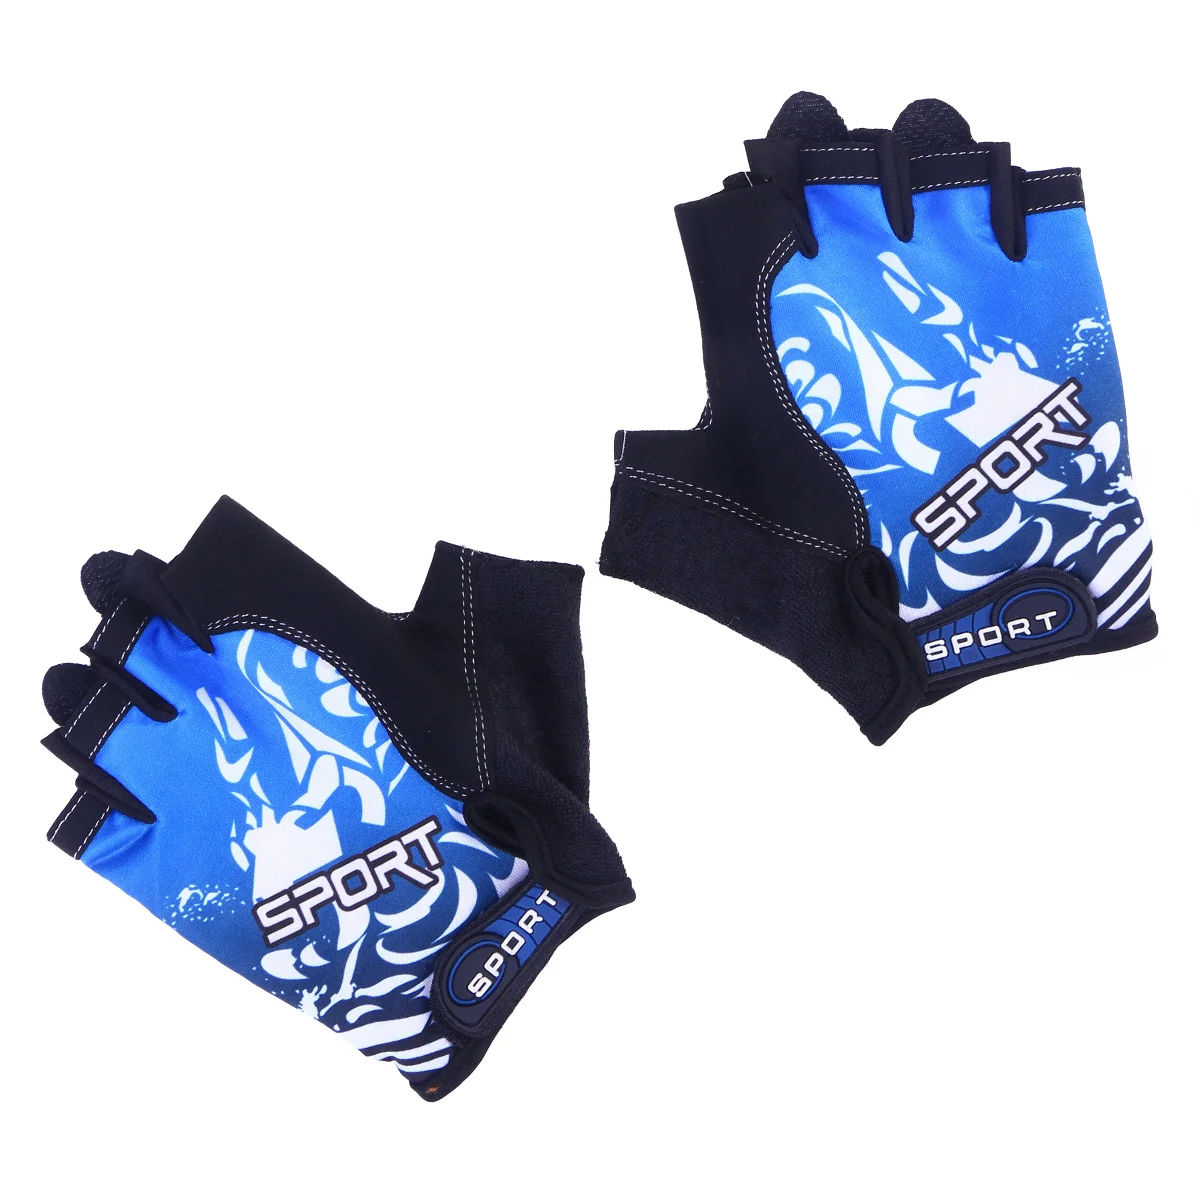 1 Pair Outdoor Sports Half Finger Gloves Non-Slip Breathable Workout Gloves for Cycling Climbing Fishing Riding Size M (Blue)